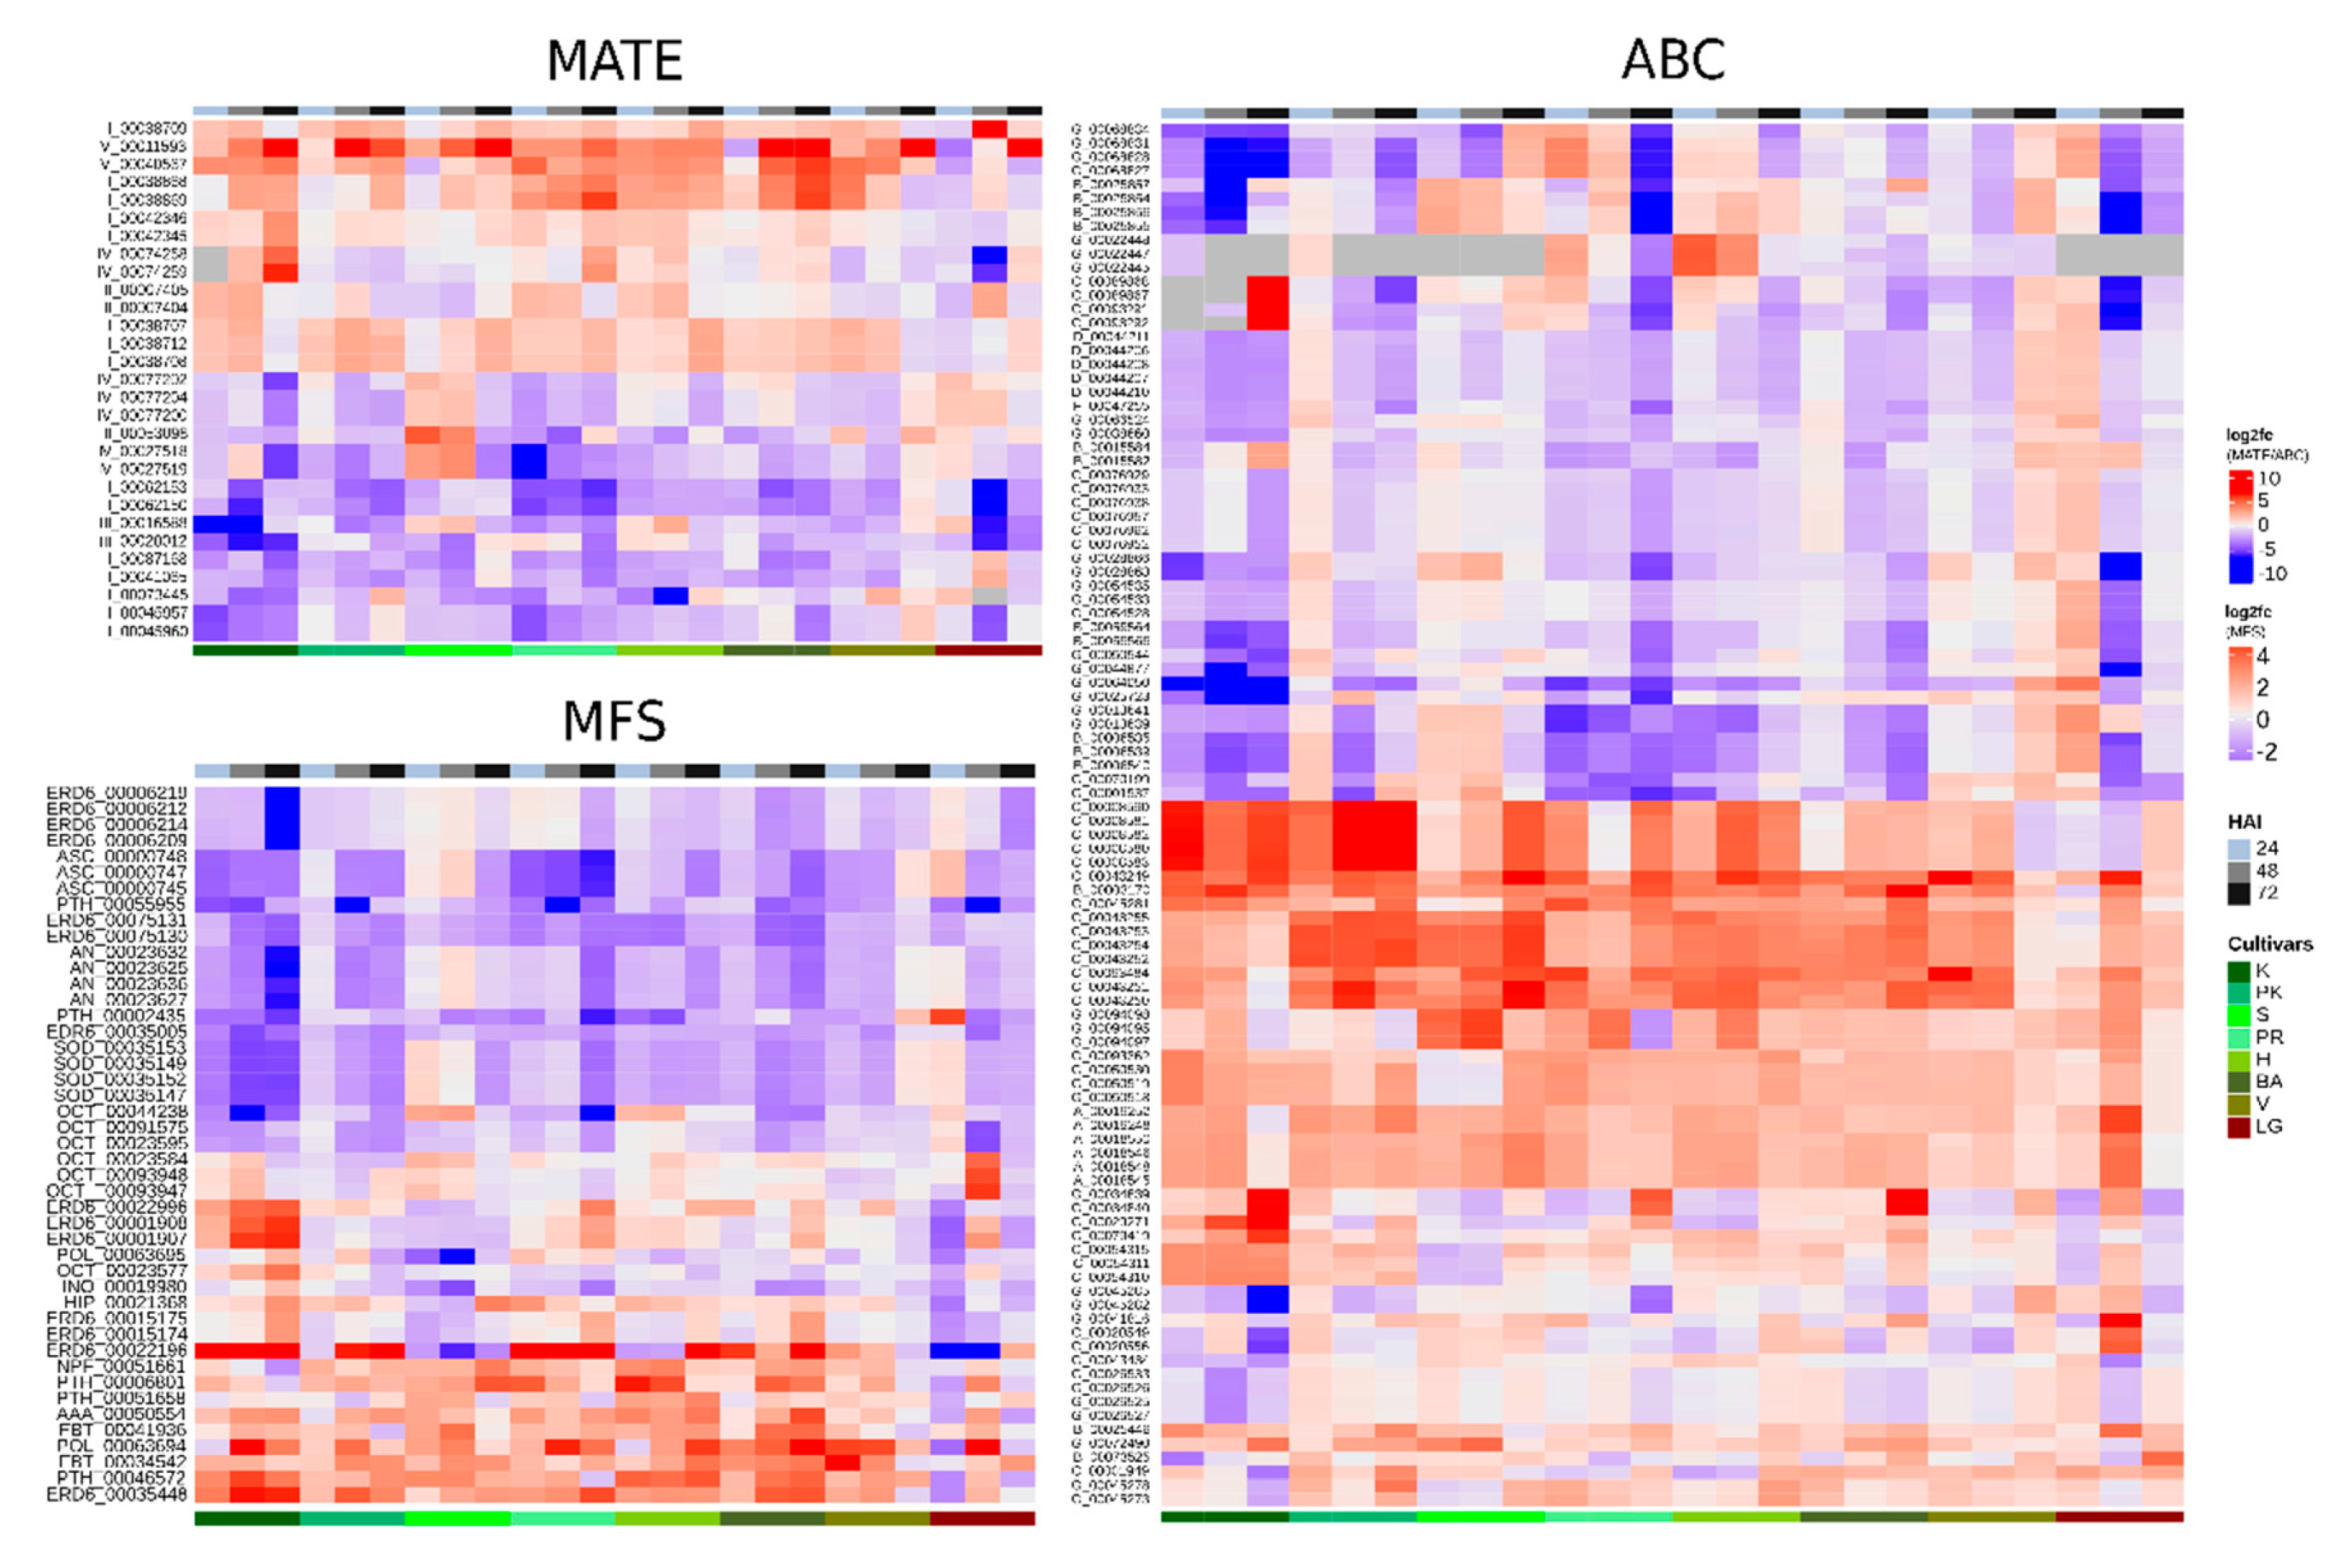 Plants Free Full Text A Genomic And Transcriptomic Overview Of Mate Abc And Mfs Transporters In Citrus Sinensis Interaction With Xanthomonas Citri Subsp Citri Html